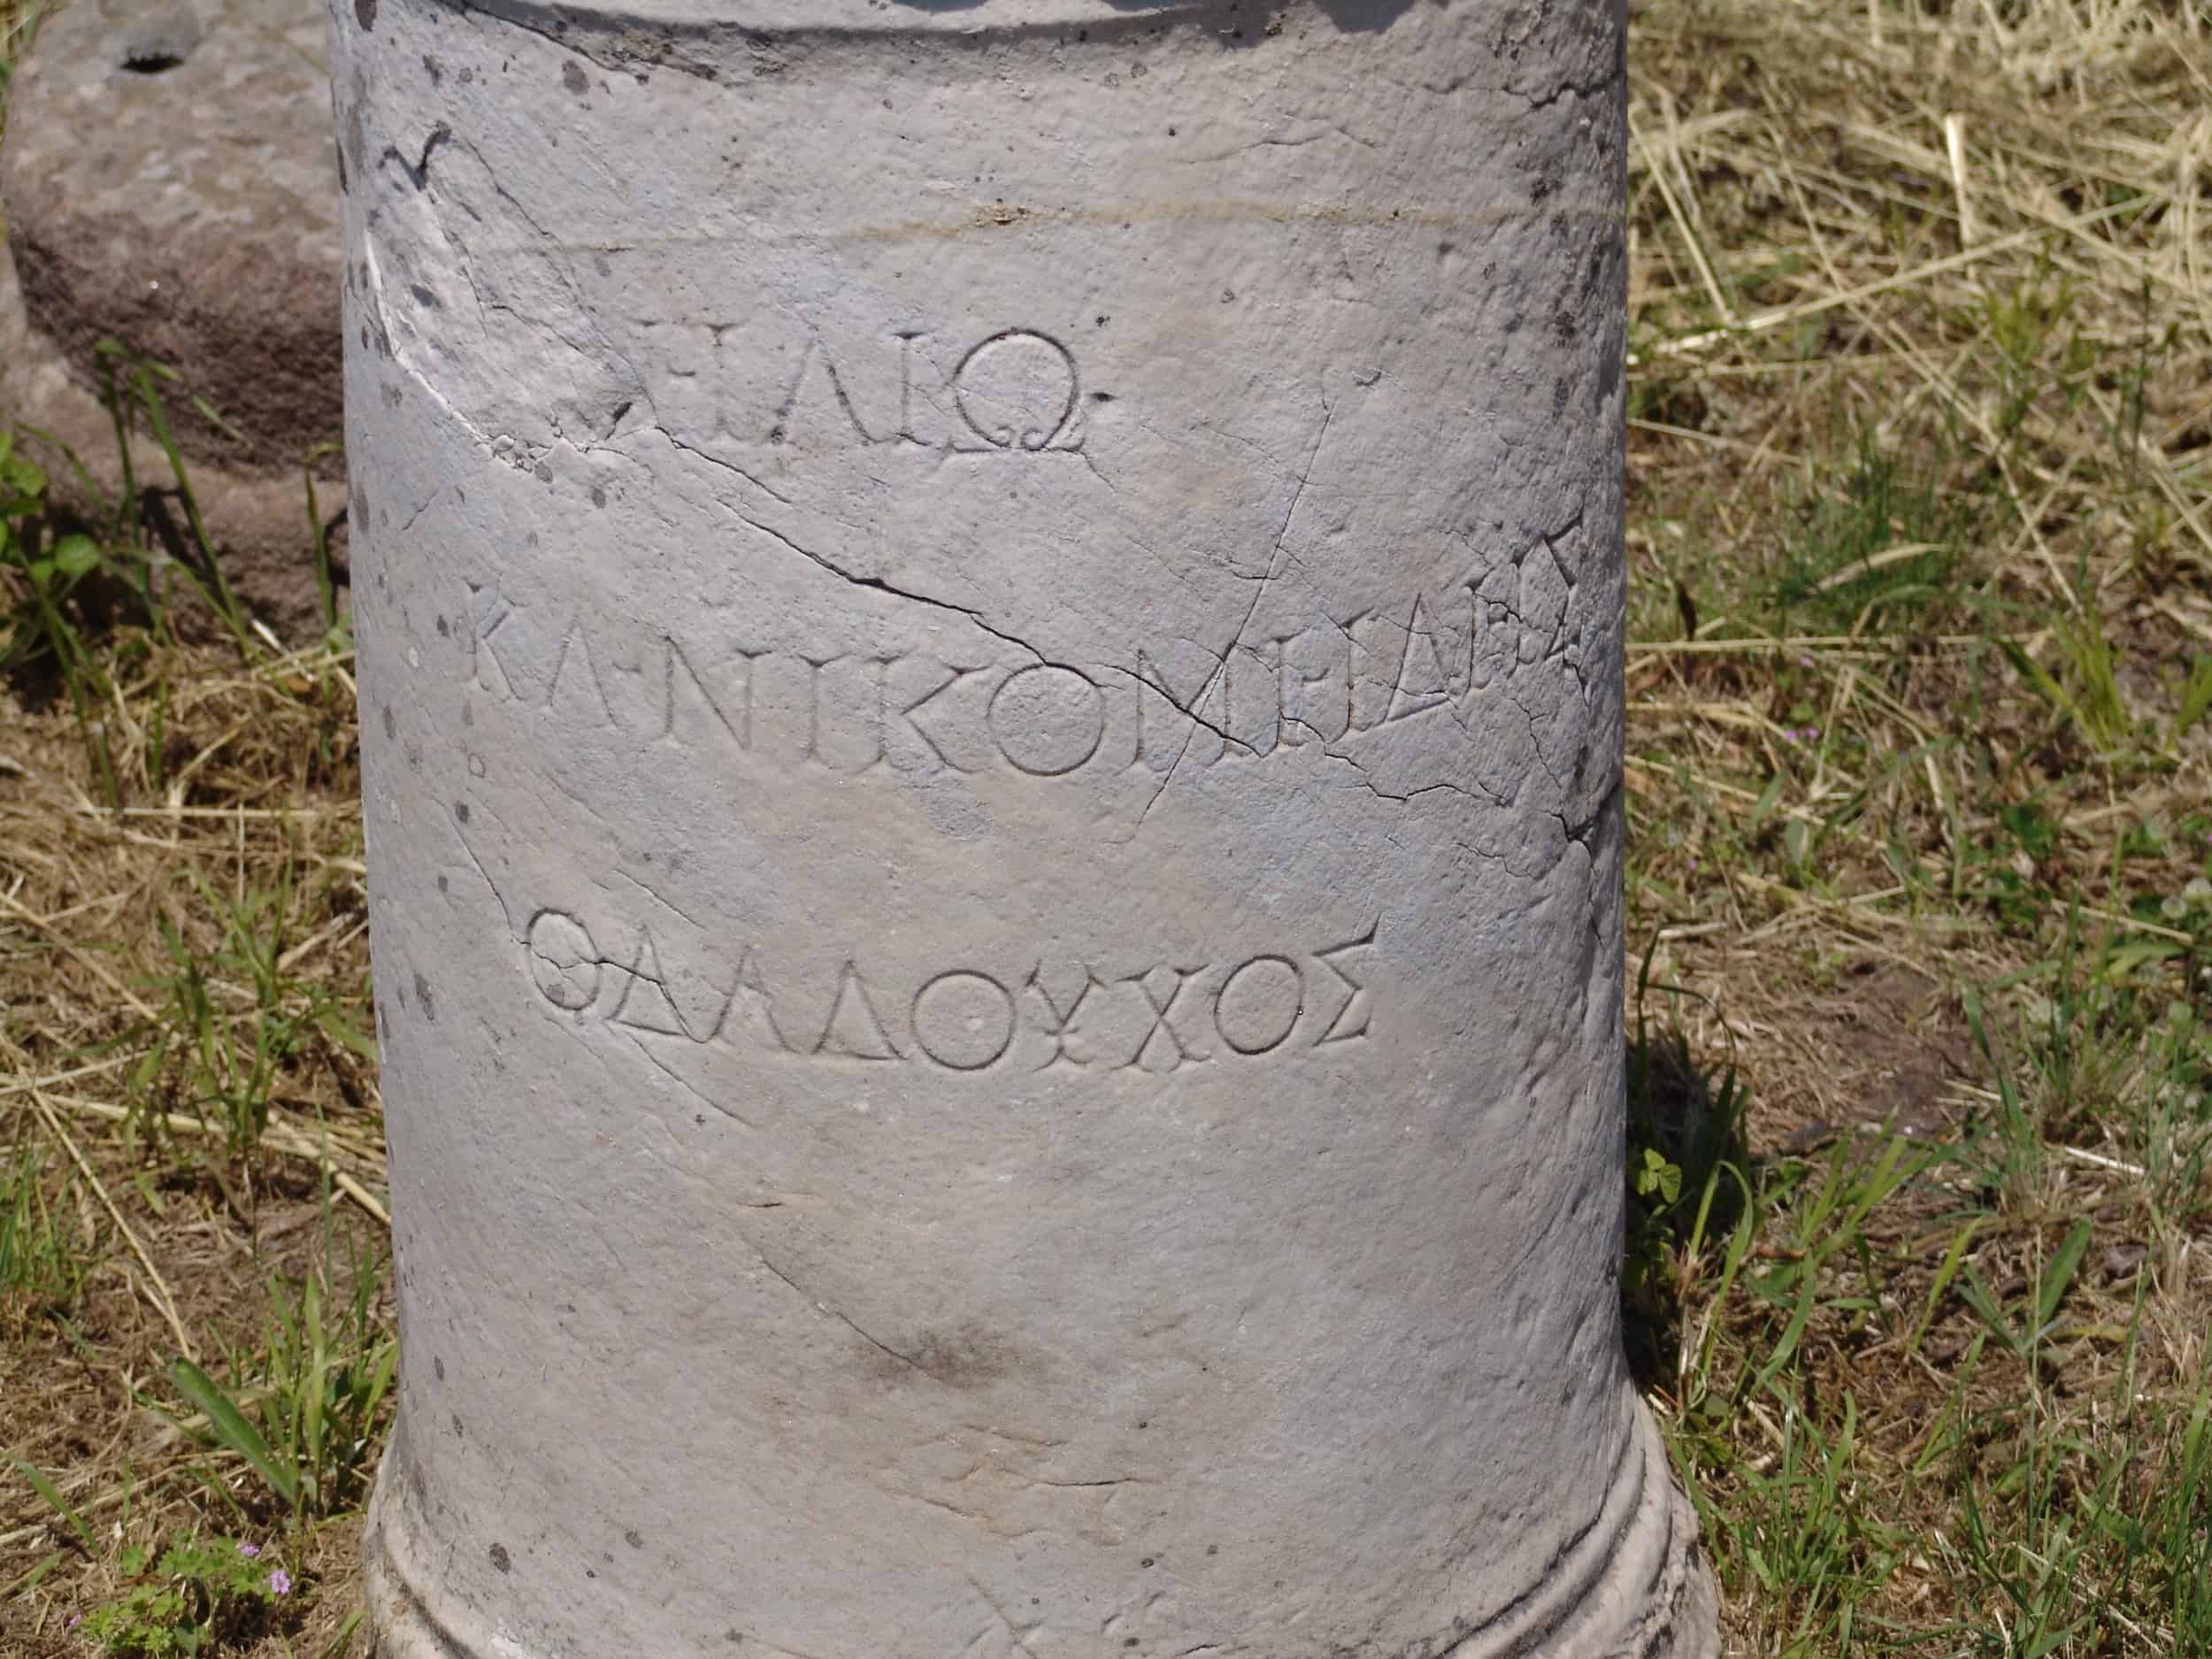 Inscription in Greek at the Sanctuary of Demeter